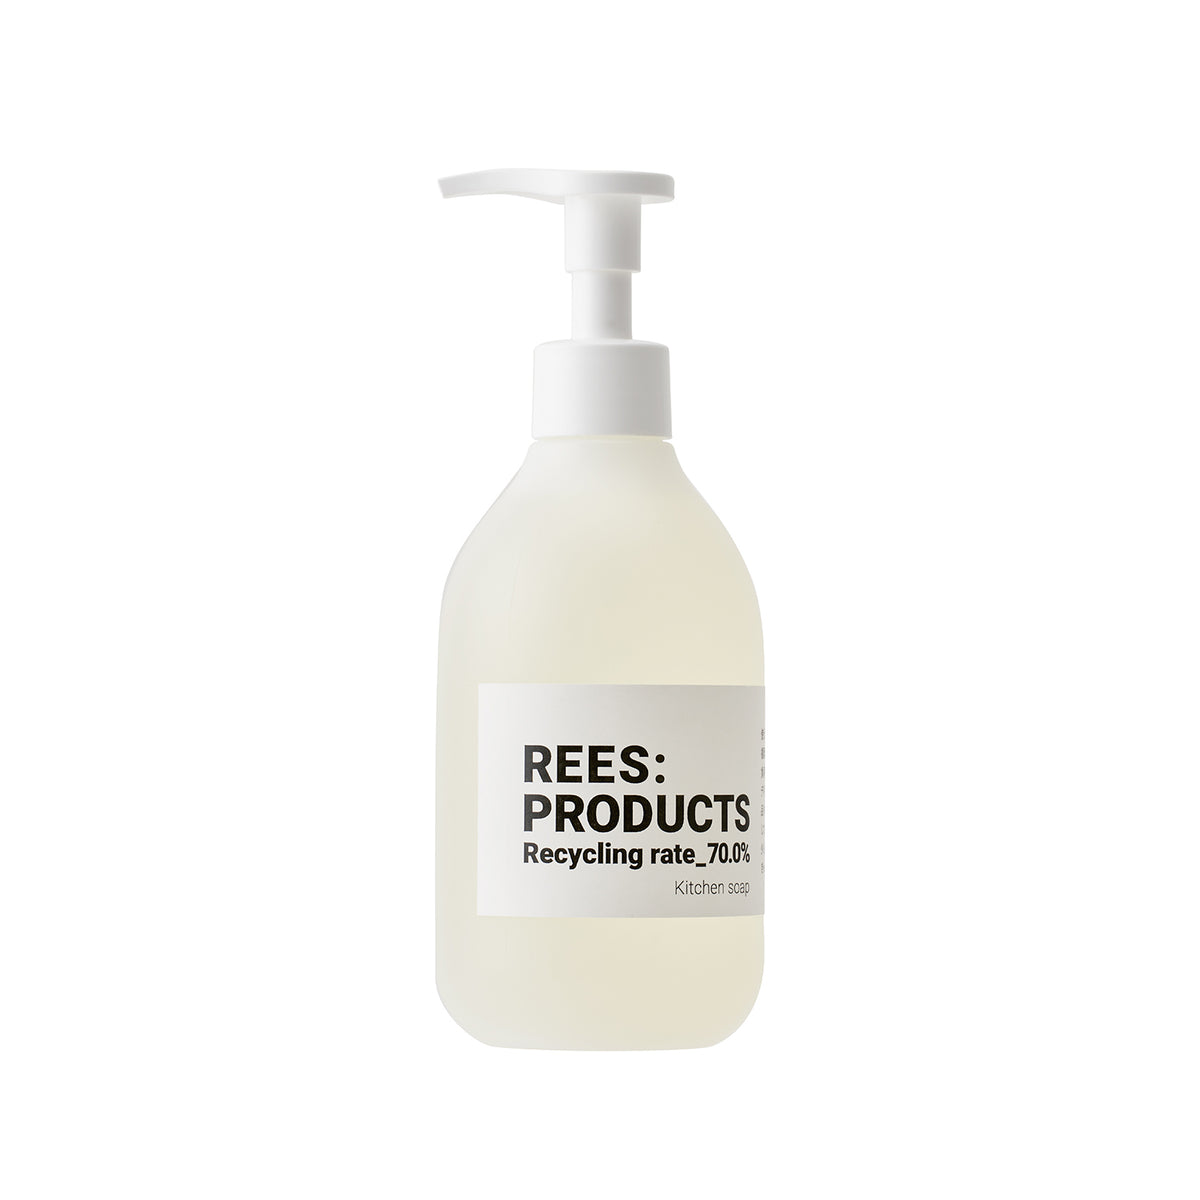 REES:PRODUCTS hand soap